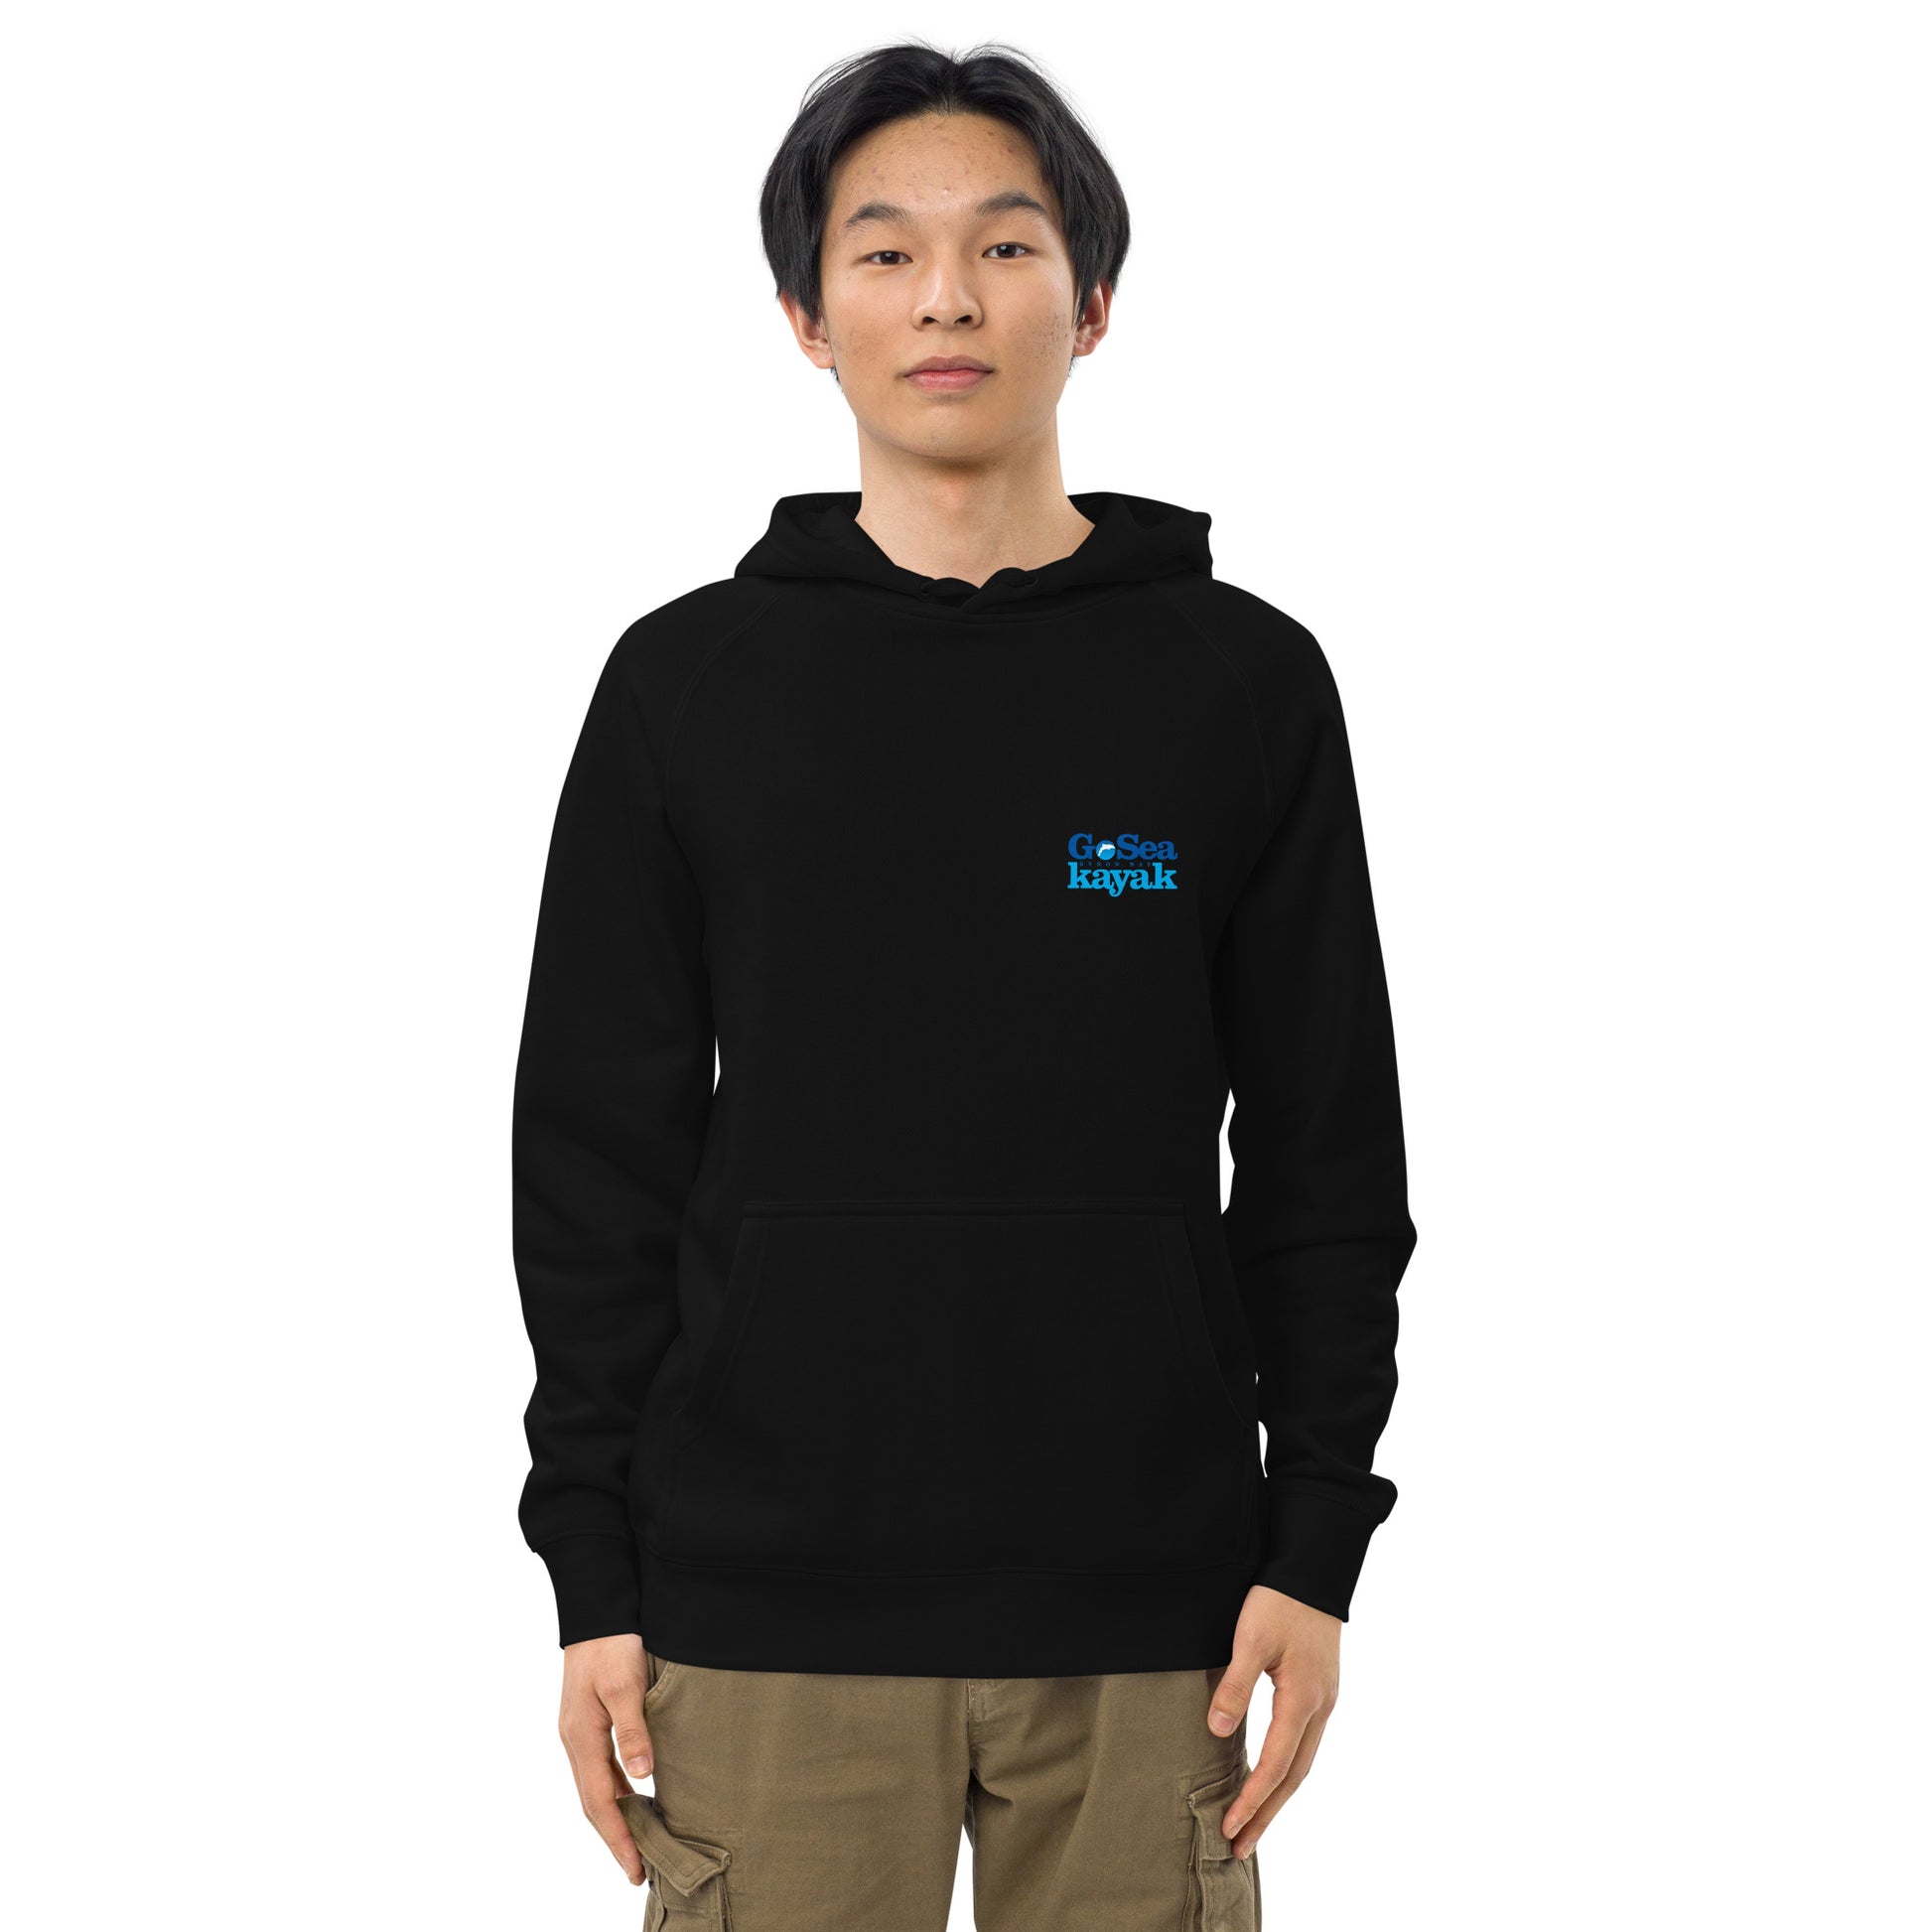  Unisex Hoodie - Black - Front view being warn by man with arms by side - Go Sea Kayak Byron Bay logo on back and front, Kangaroo pocket on front - Genuine Byron Bay Merchandise | Produced by Go Sea Kayak Byron Bay 